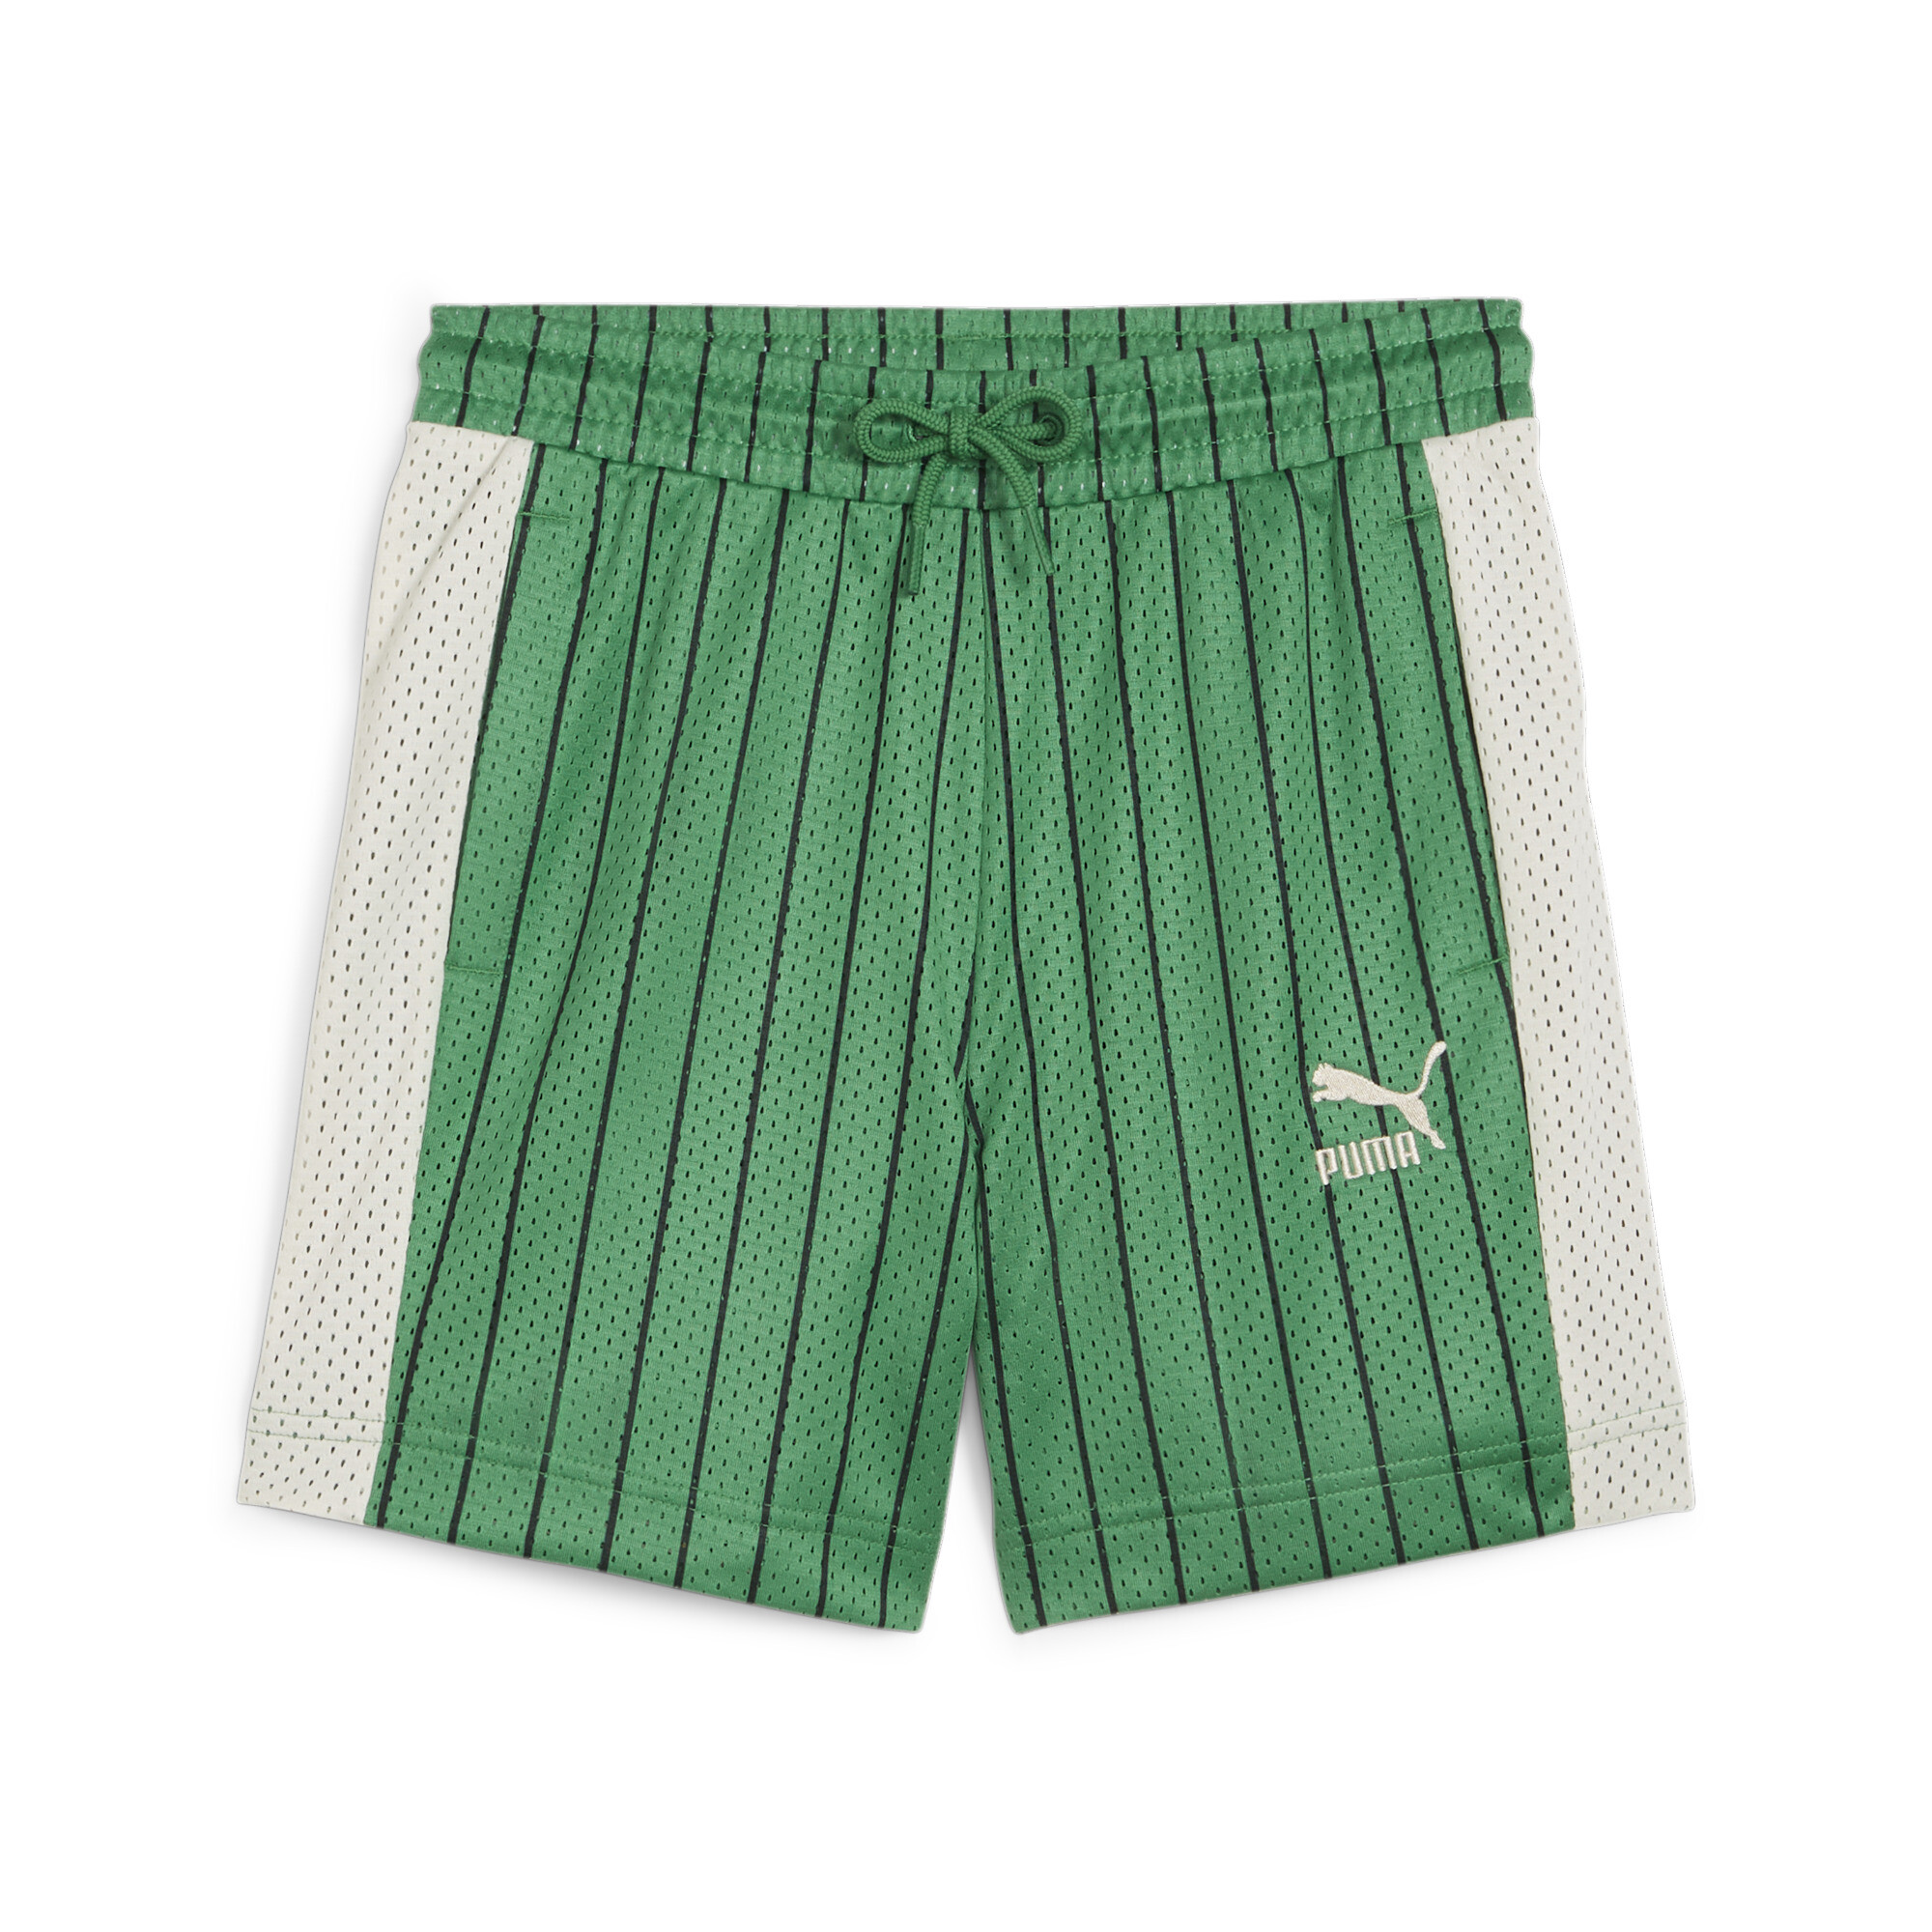 PUMA For The Fanbase Basketball Shorts In Green, Size 9-10 Youth